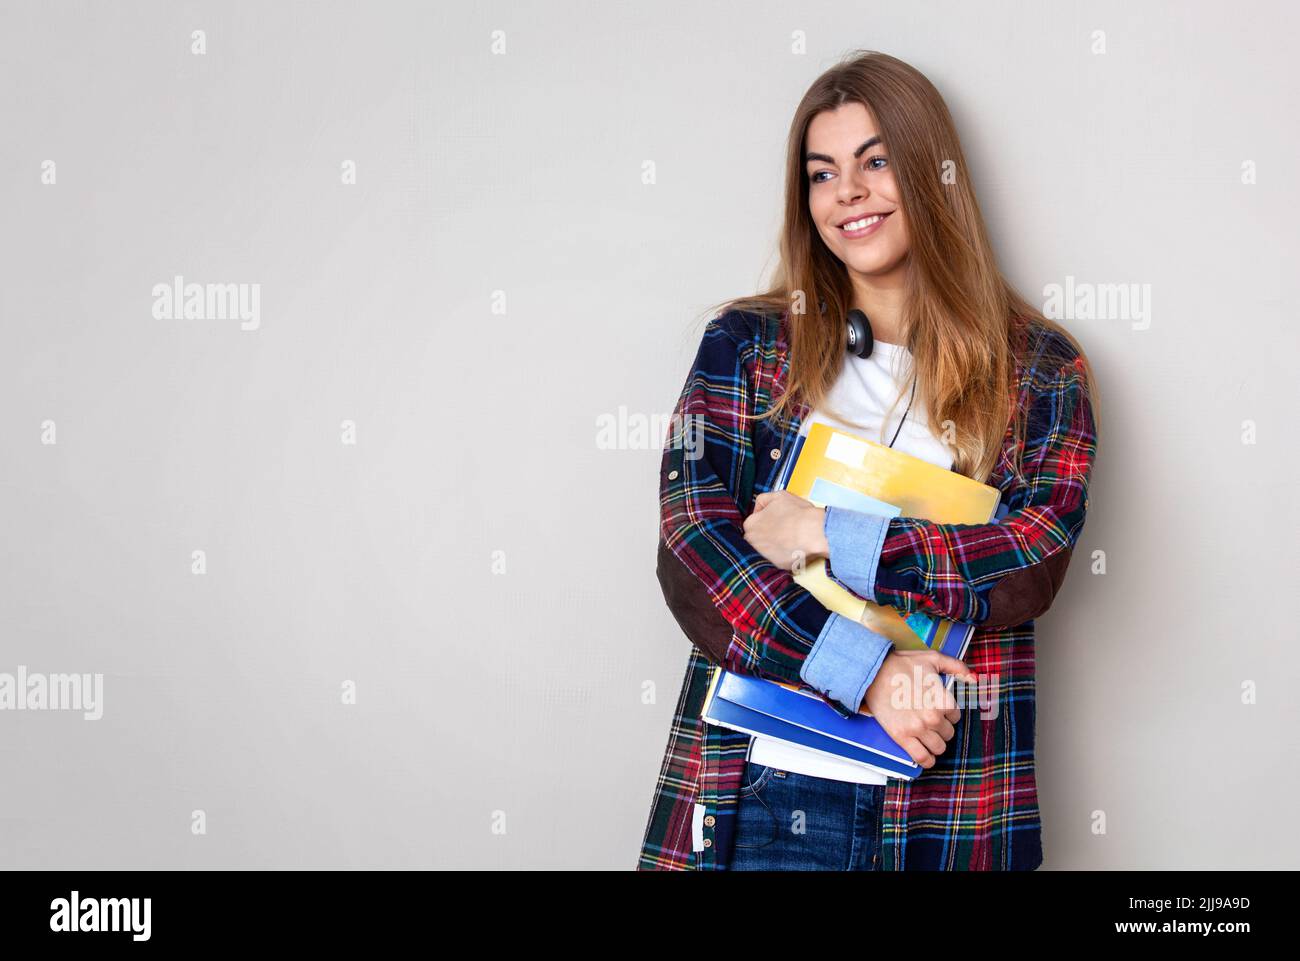 Studio portrait of young beautiful female student with books standing against wall. Stock Photo